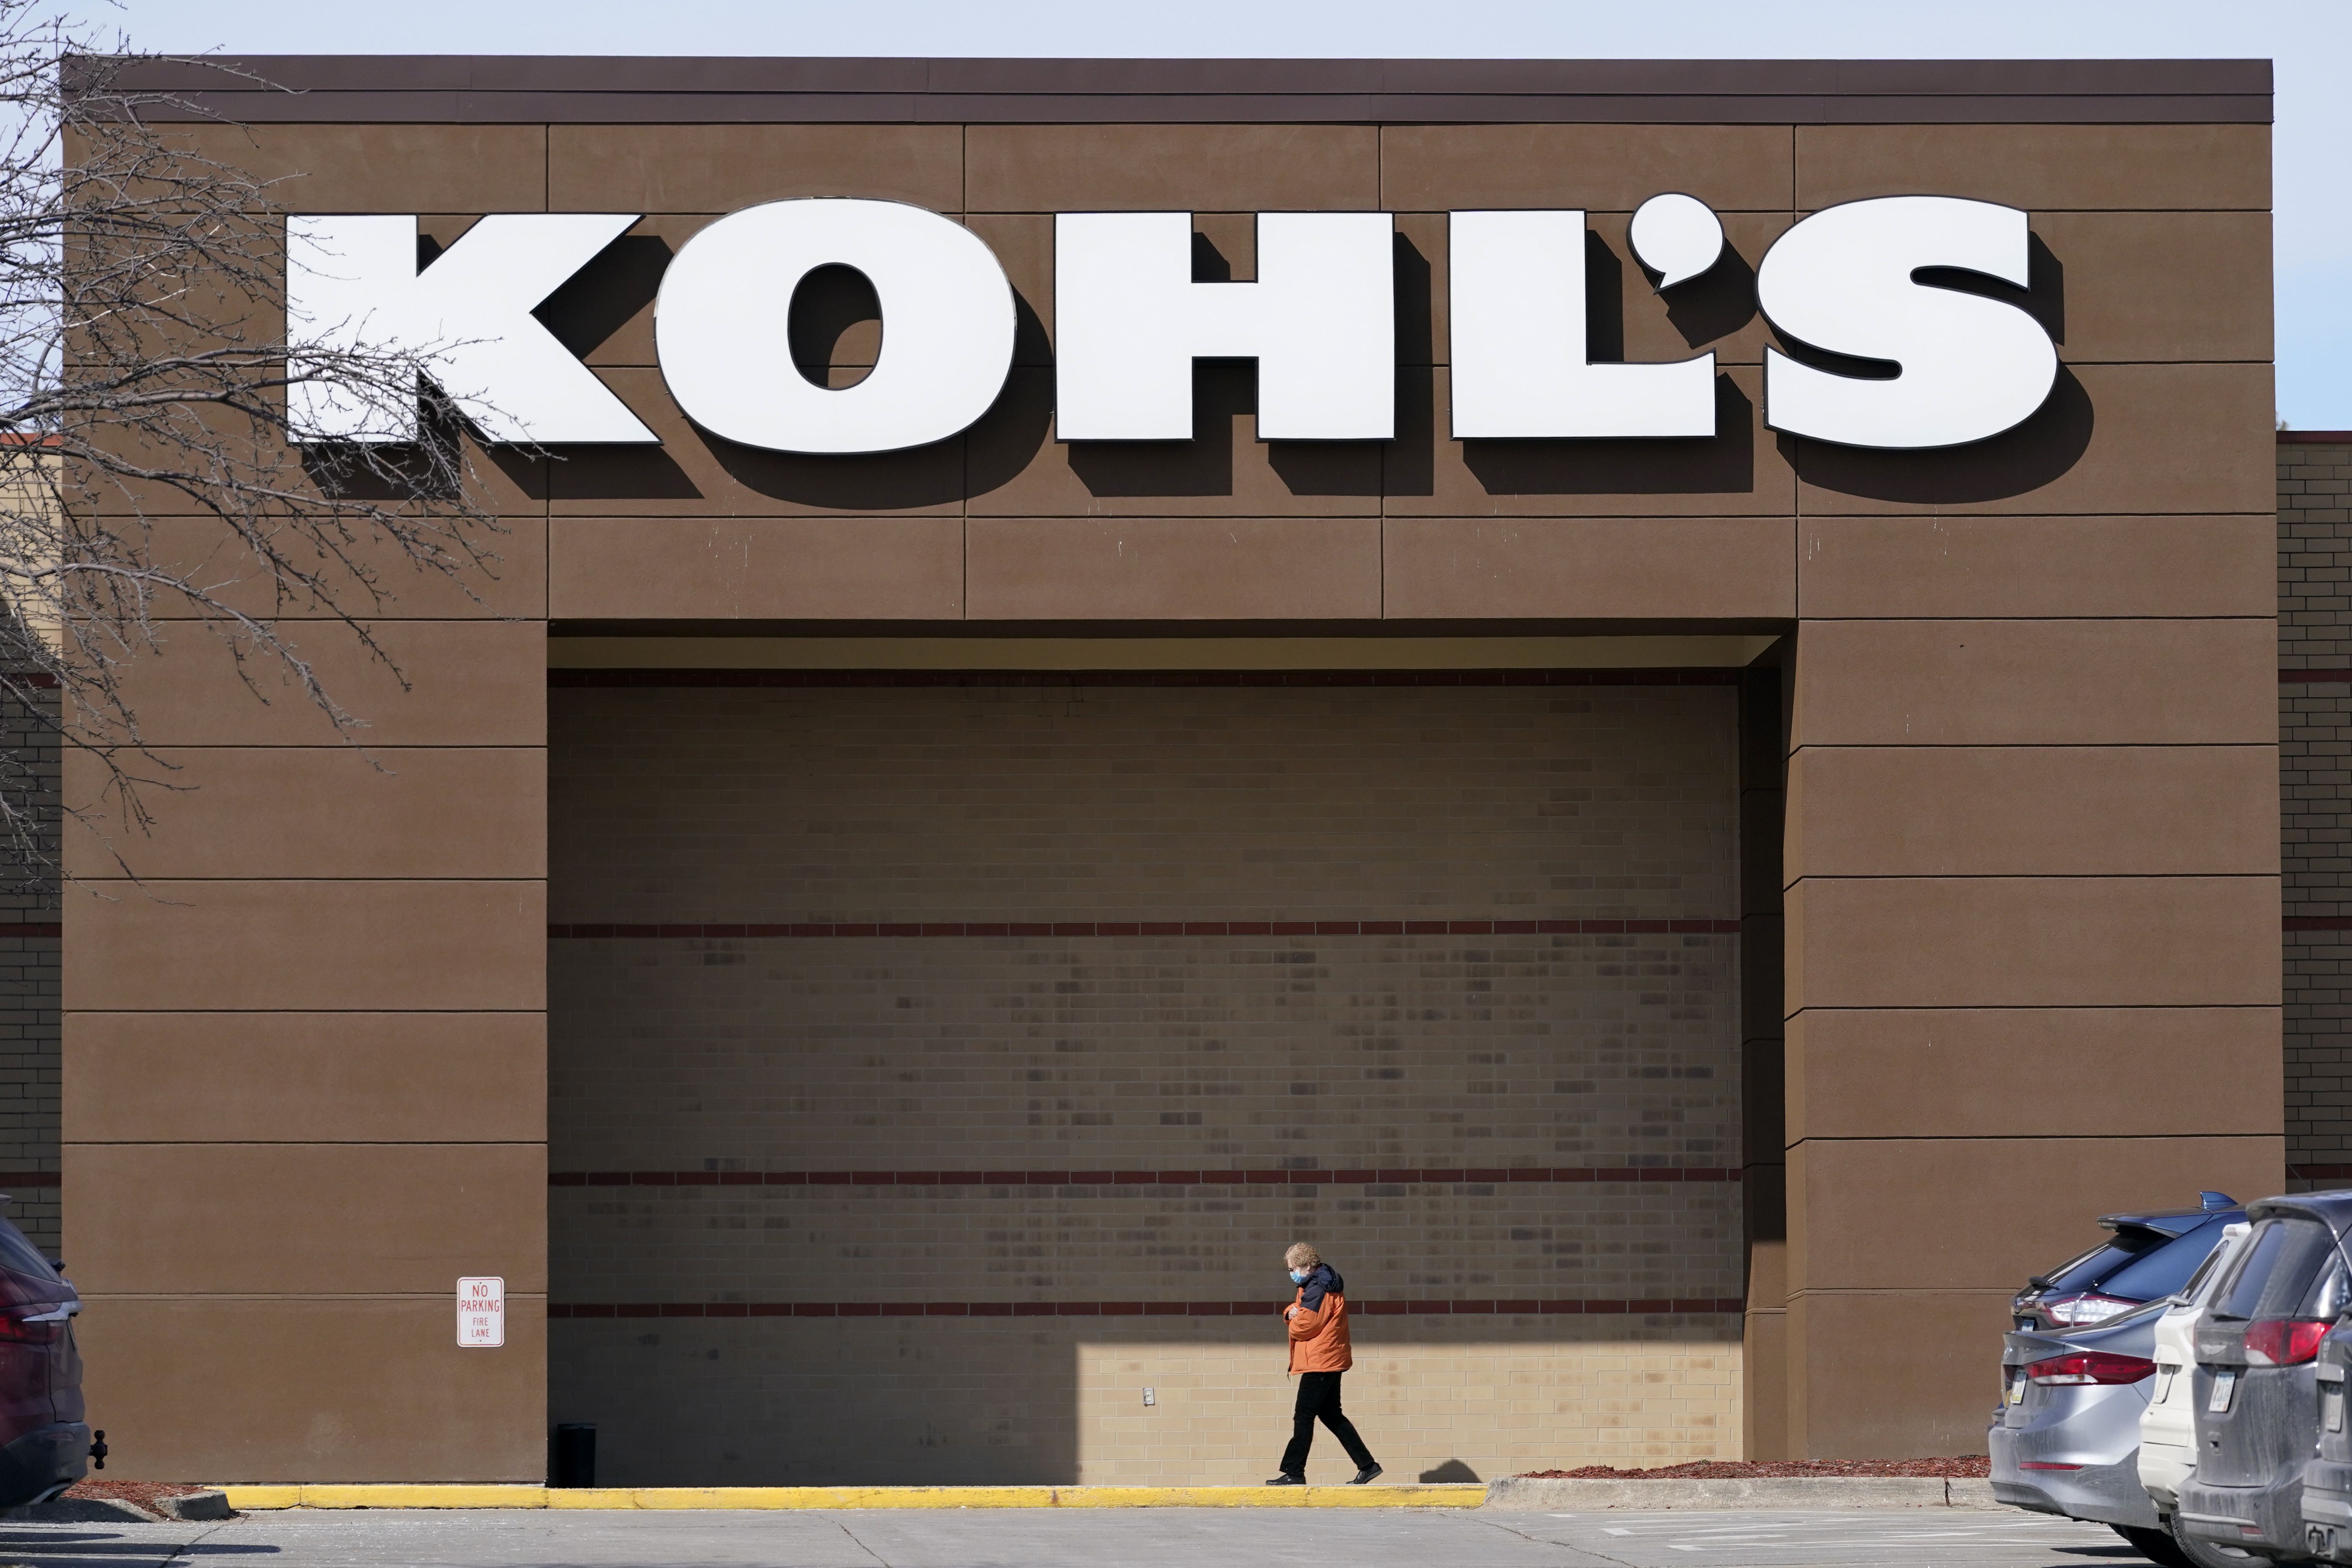 Kohl's CEO pitches retailer's turnaround efforts after surprise